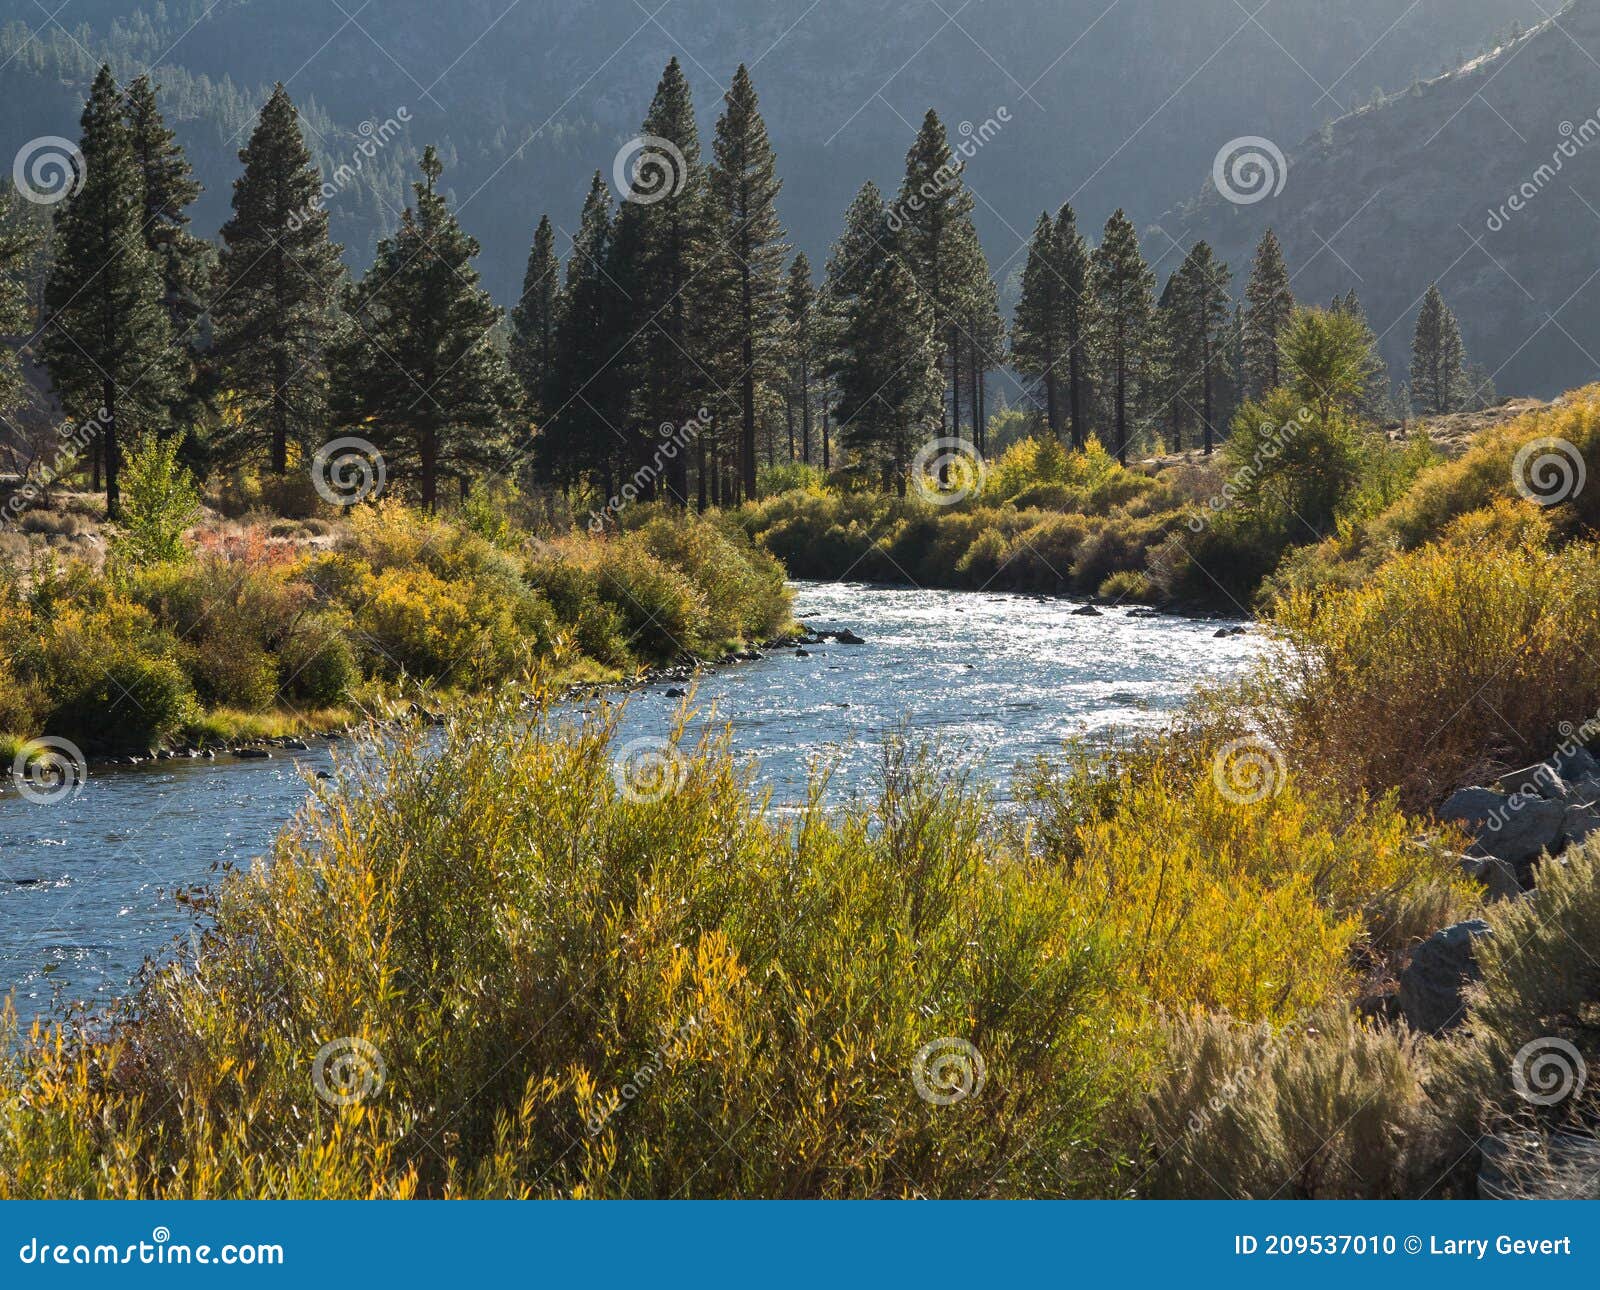 the truckee river west of reno, nevada